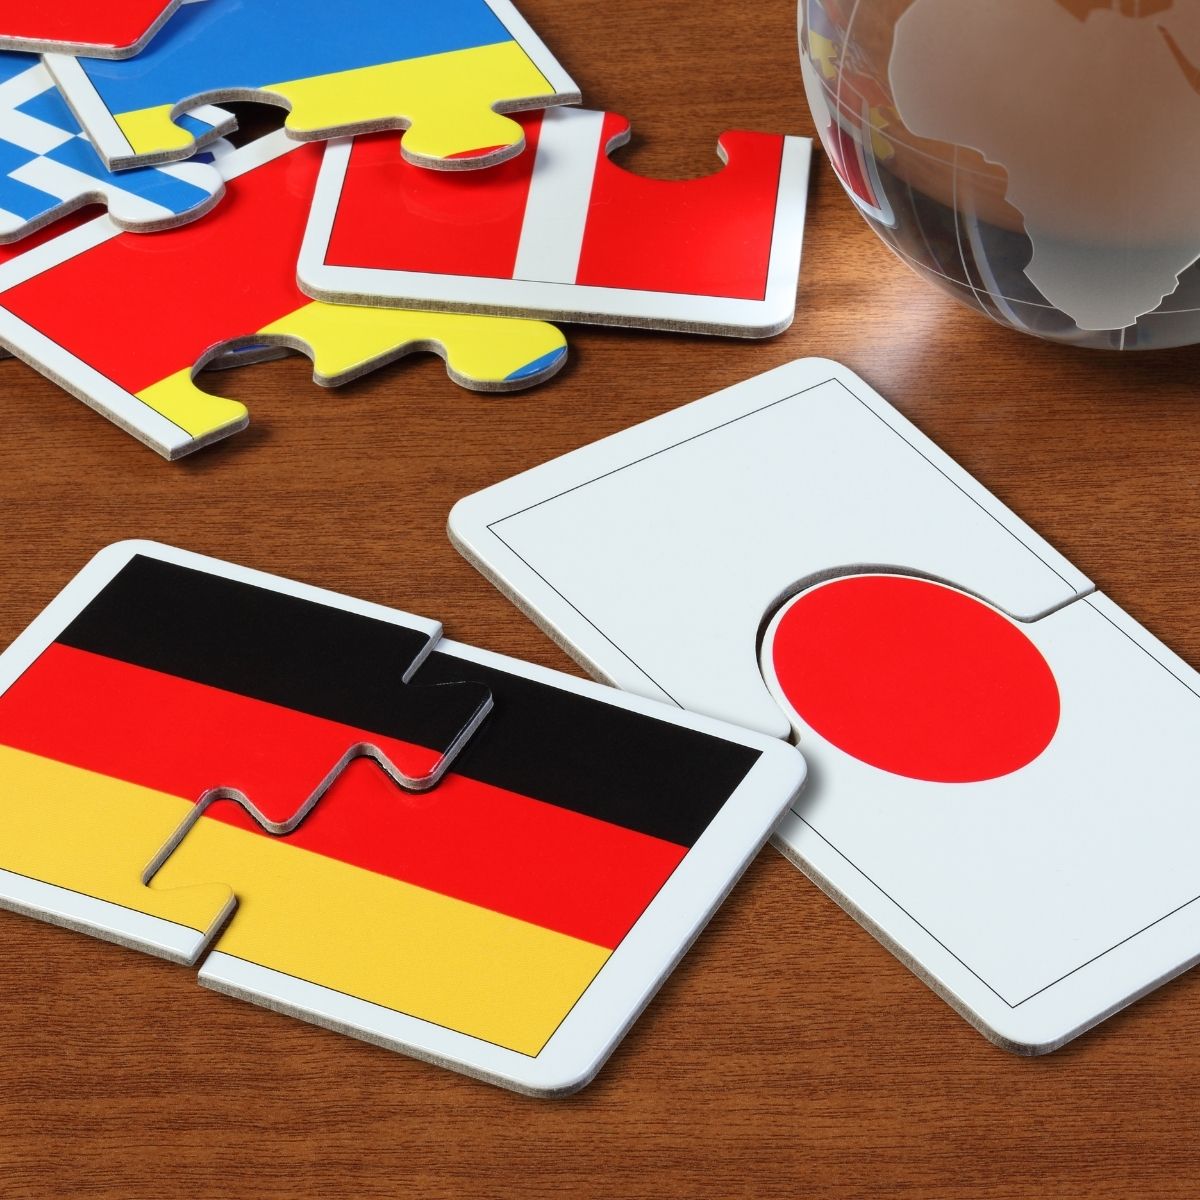 The Japanese and German scissor brands on a salon table